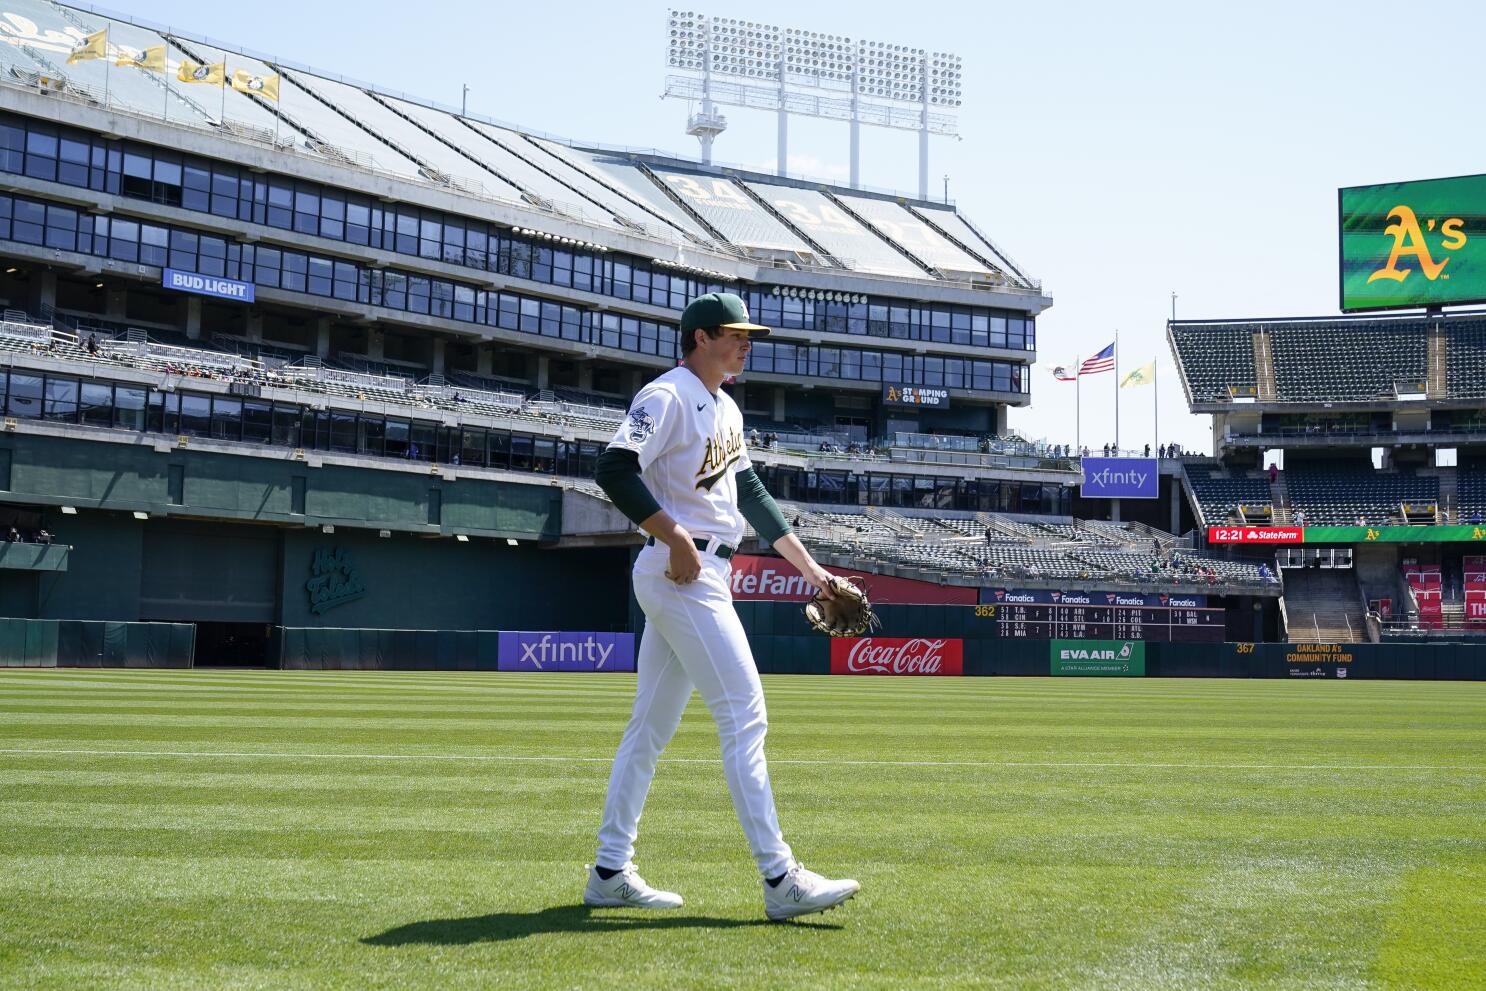 MLB and A's should do the right thing and keep team in Oakland